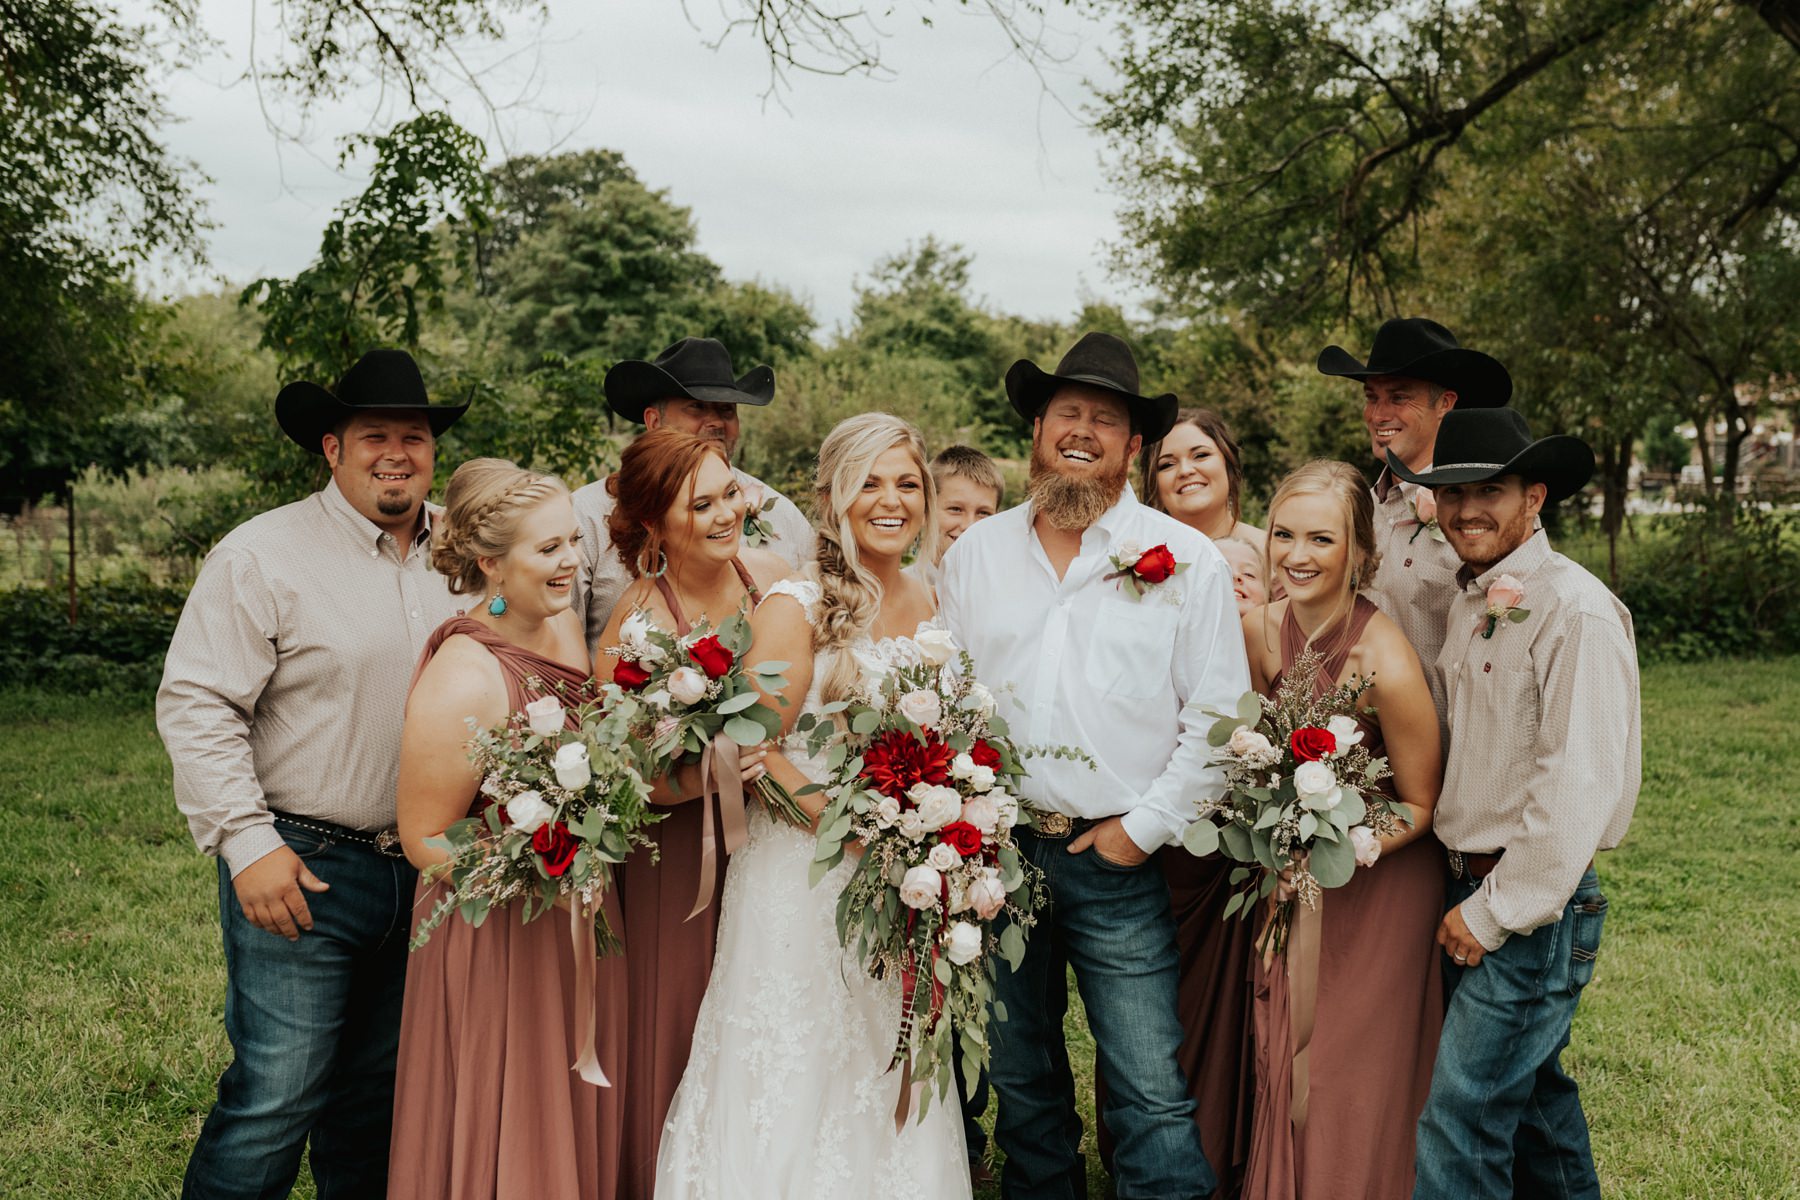 A bridal party at The Barn at Belamour in Springfield, MO.